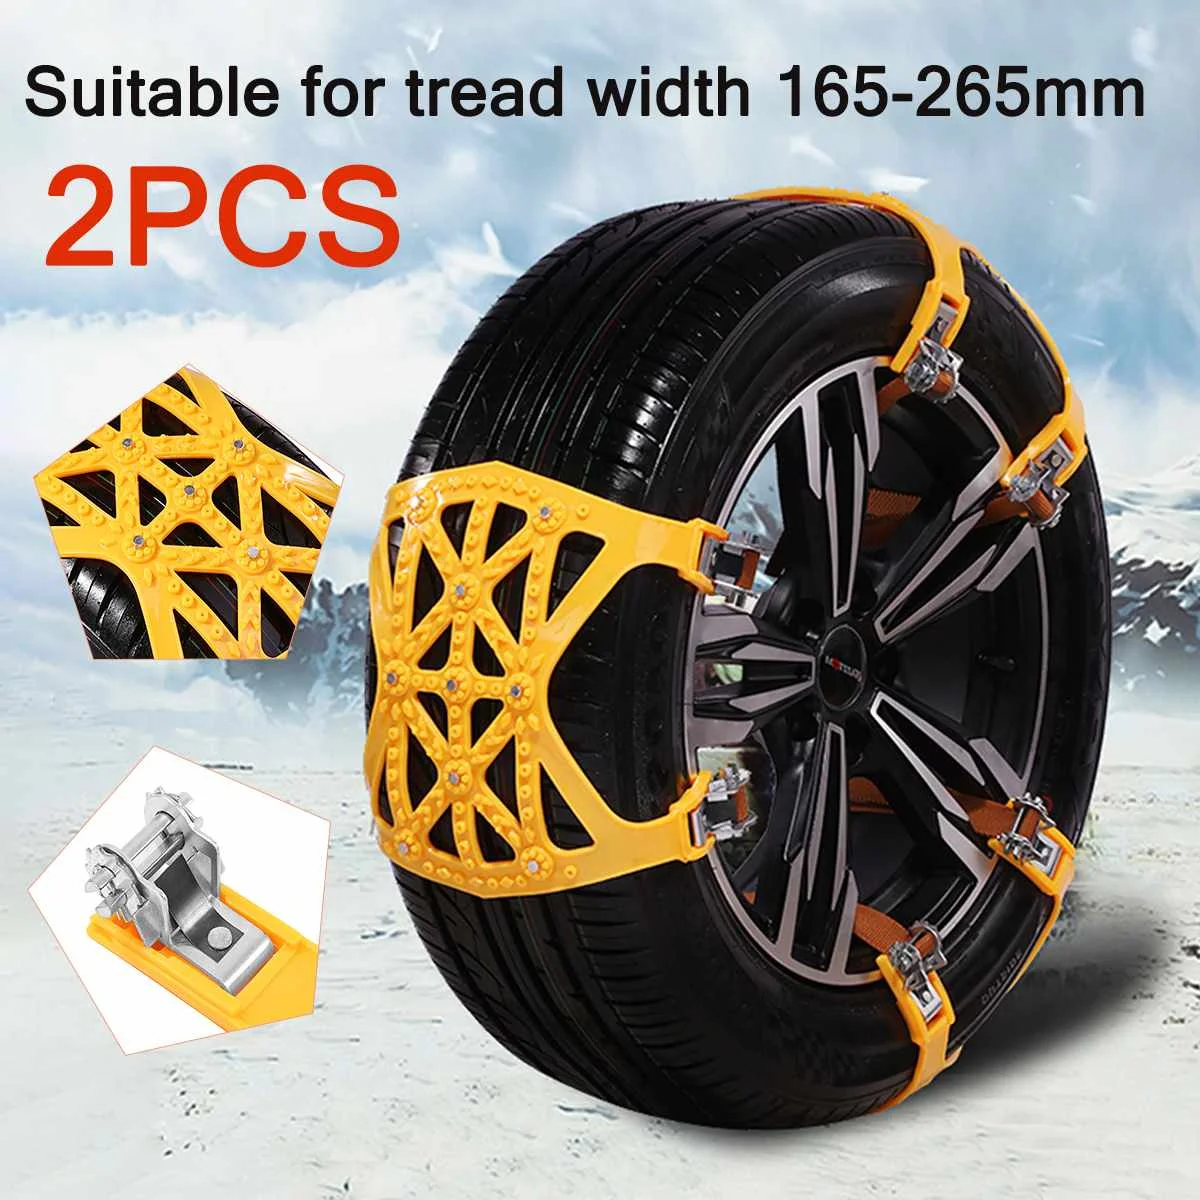 

2PCS 165-265mm Car Wheels Tyre Tire Ice Snow Chains Belt Winter Anti-skid Vehicles SUV Wheel Chain Mud Road Safe Safety